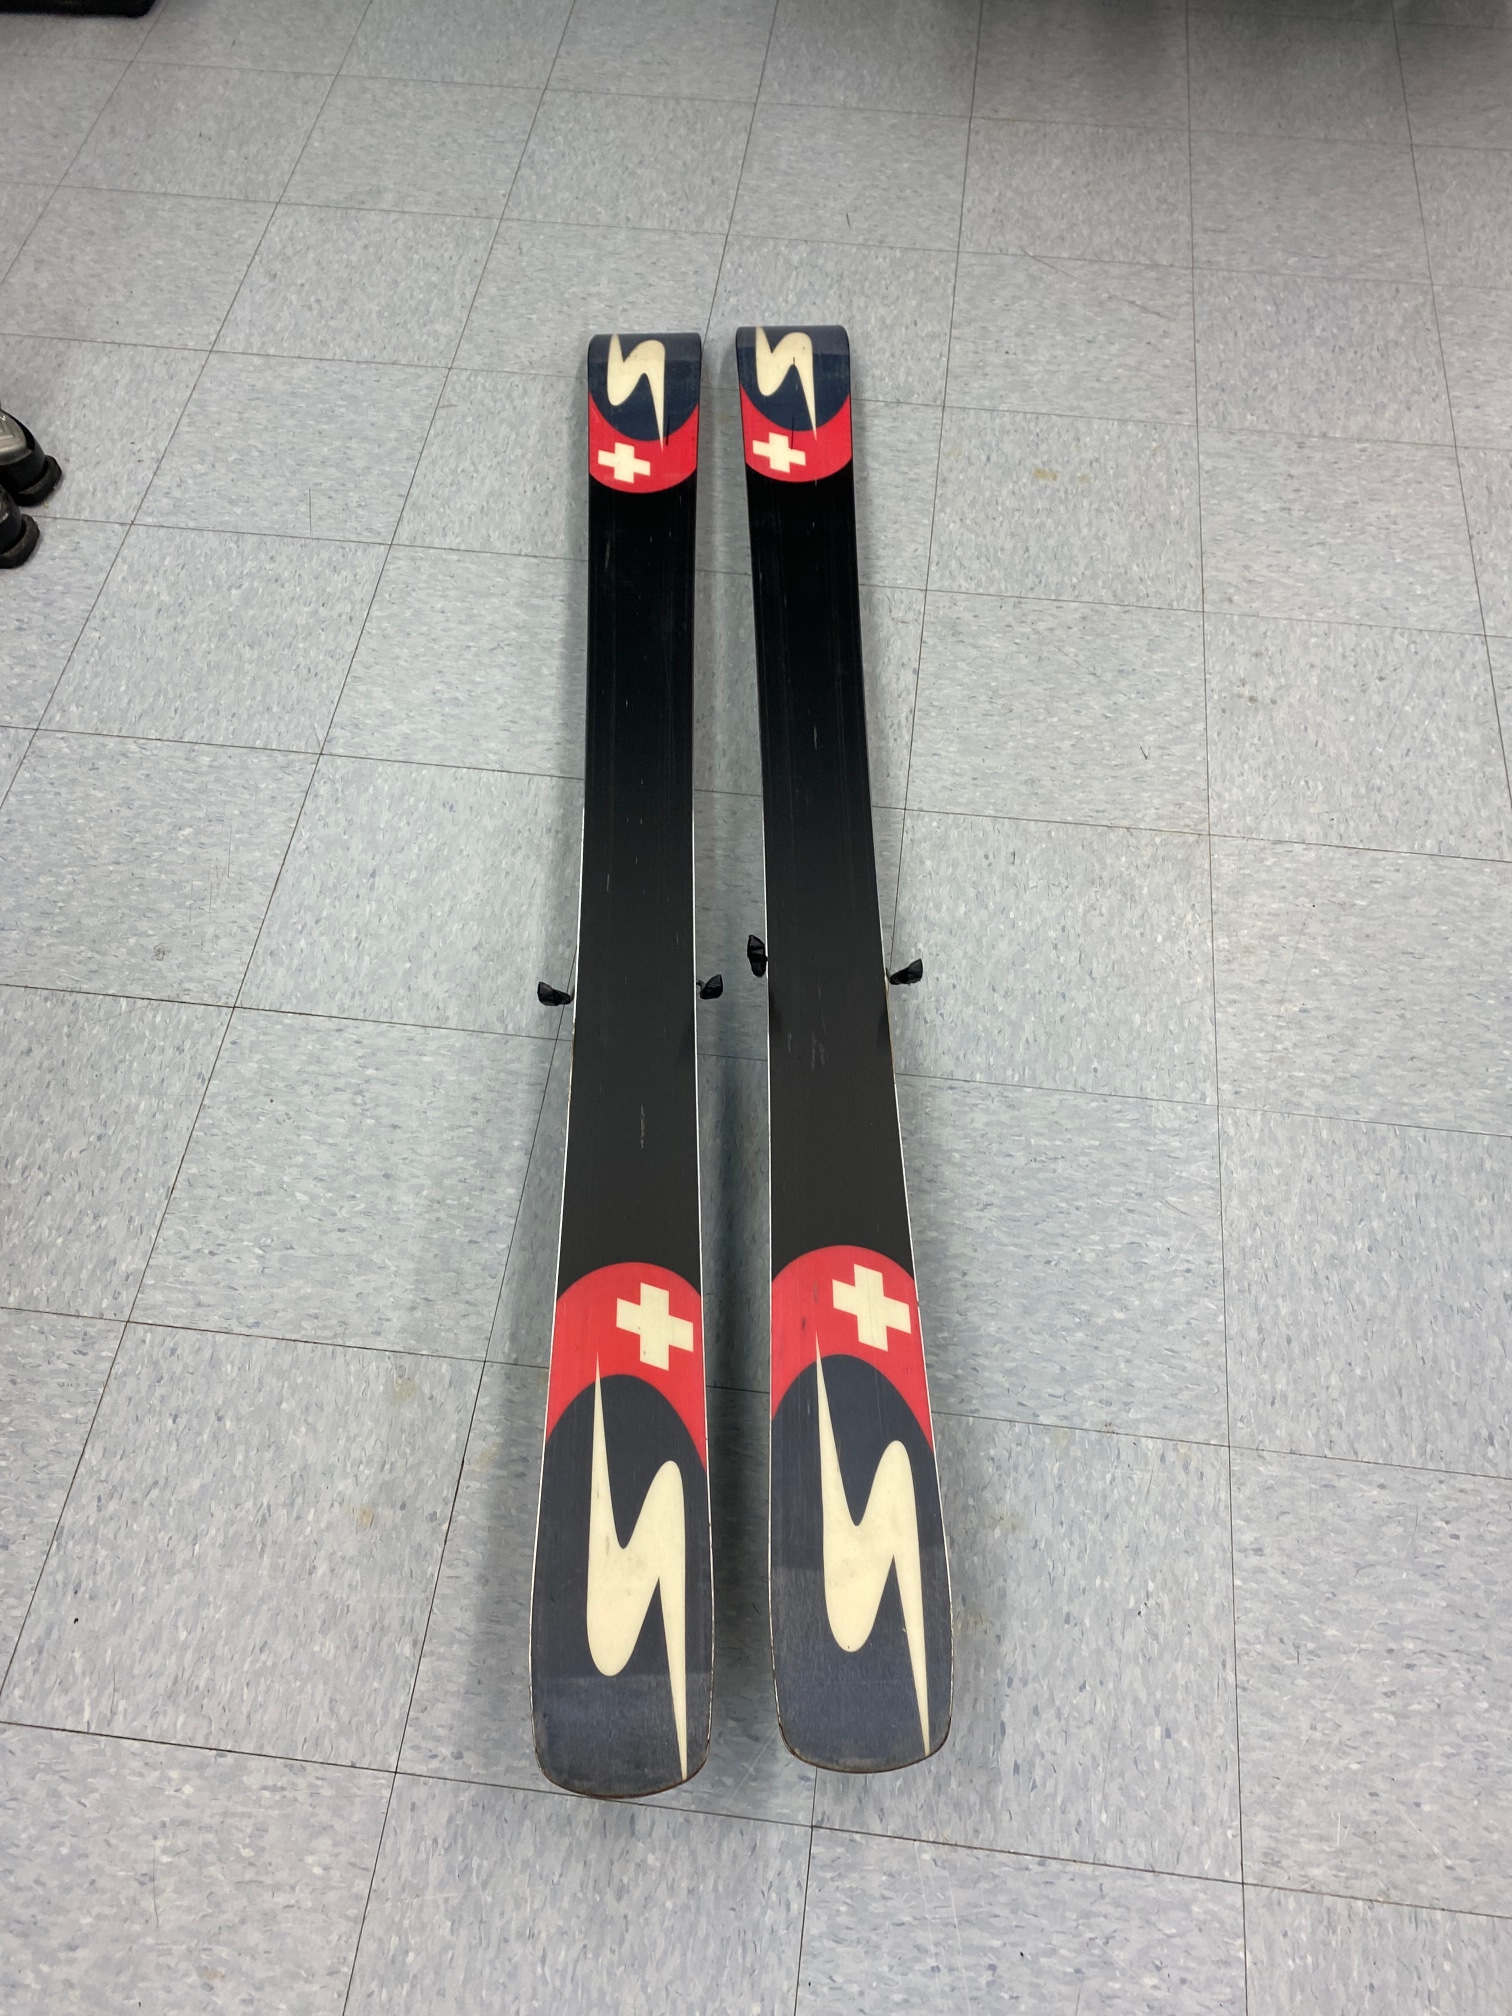 Used 2011 Stockli 166 cm Powder Skis With Bindings Max Din 12